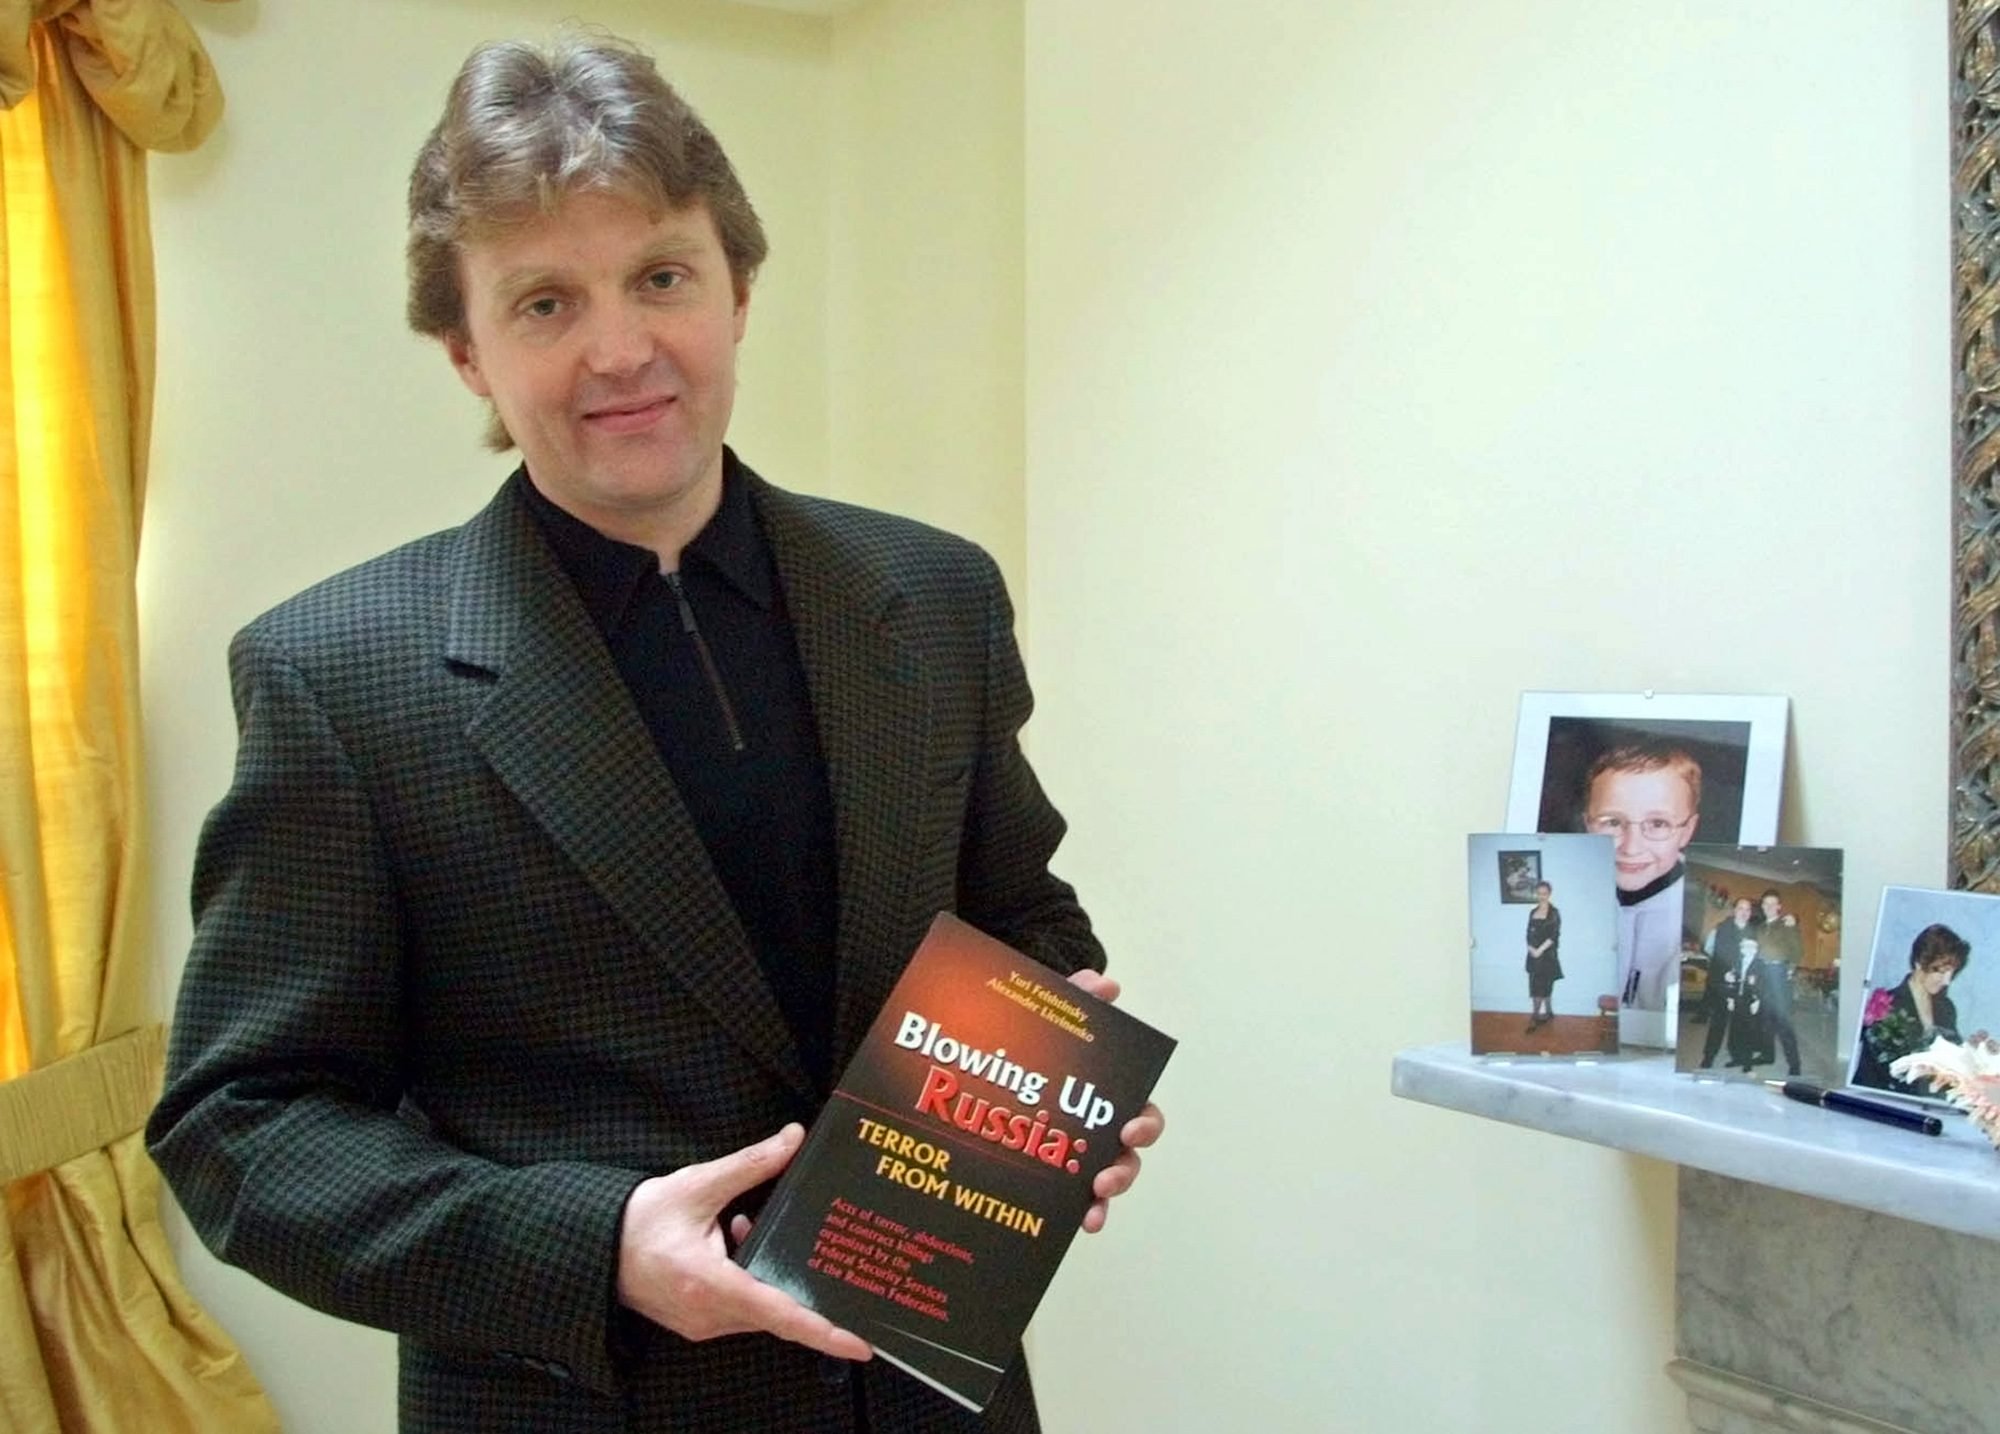 Alexander Litvinenko A photo from files showing Alexander Litvinenko, former KGB spy and author of the book "Blowing Up Russia: Terror From Within" photographed at his home in London. Polonium first hit the headlines when it was used to kill KGB agent-turned-Kremlin critic Alexander Litvinenko in London in 2006. This week, Yasser Arafat's widow has called for the late Palestinian leader's body to be exhumed after scientists in Switzerland found elevated traces of radioactive polonium-210 on clothing he allegedly wore before his death in 2004 BC-EU--Polonium